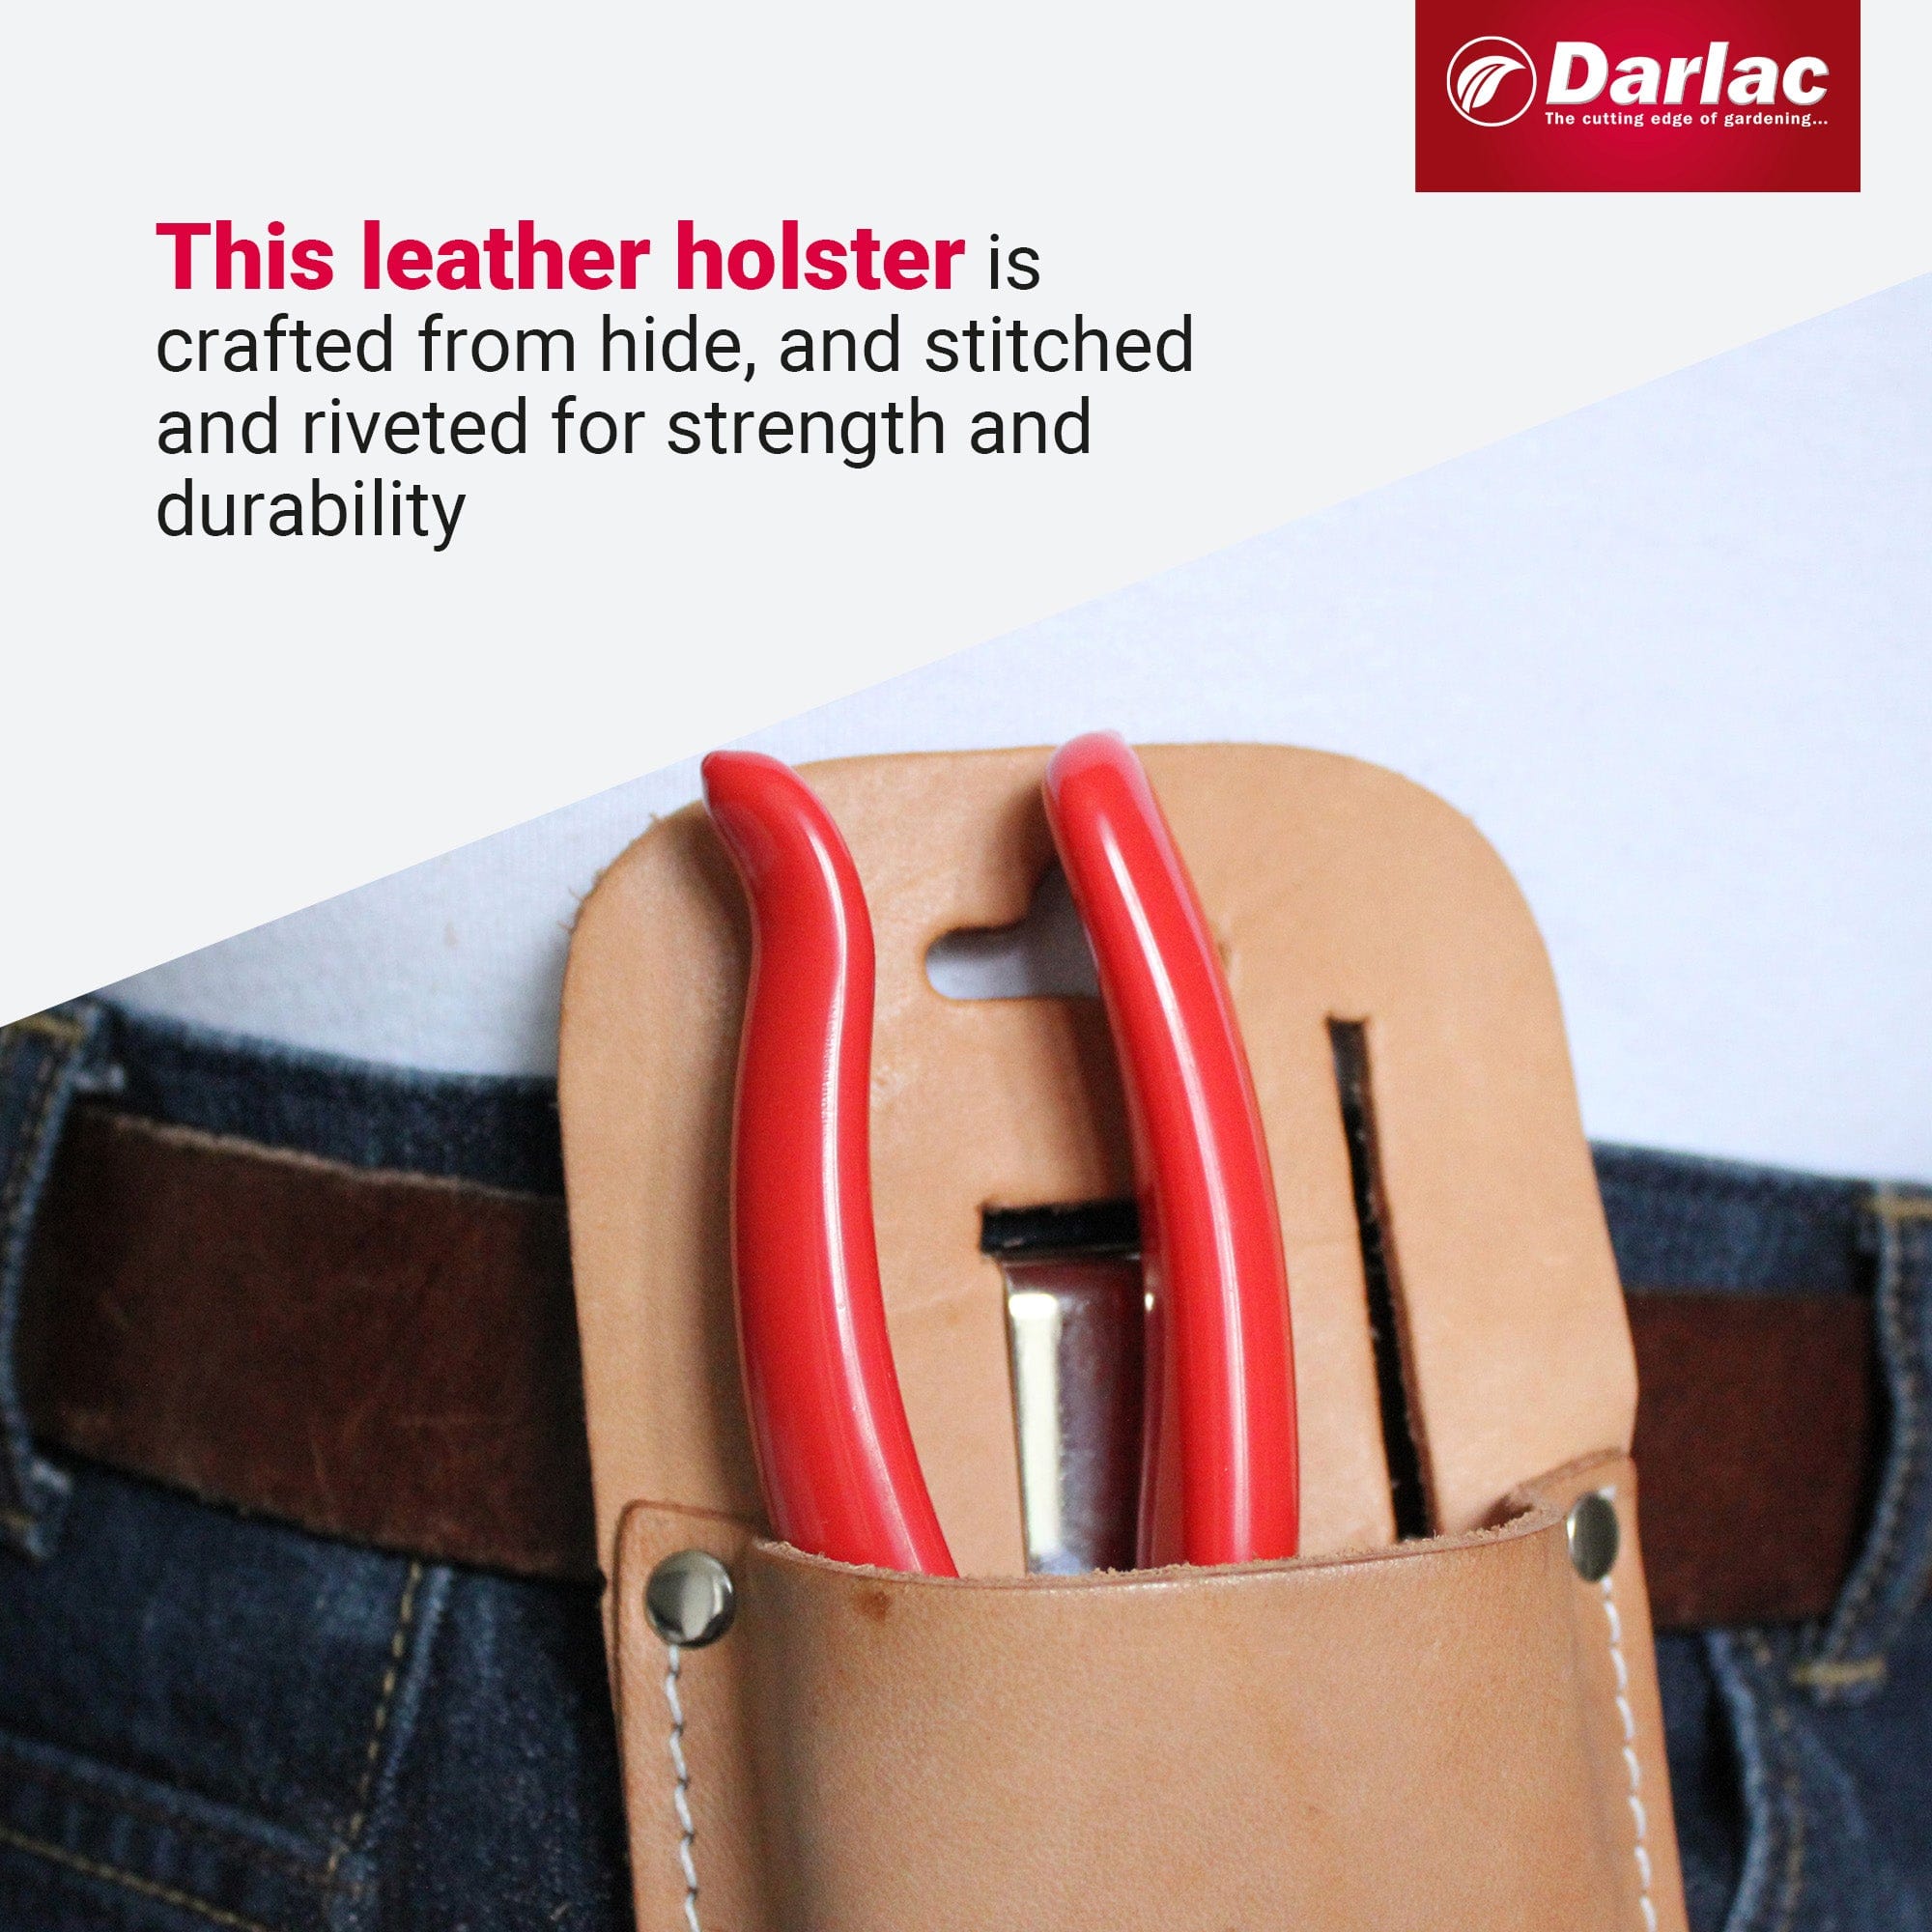 dt-brown HARDWARE Darlac Expert Leather Holster